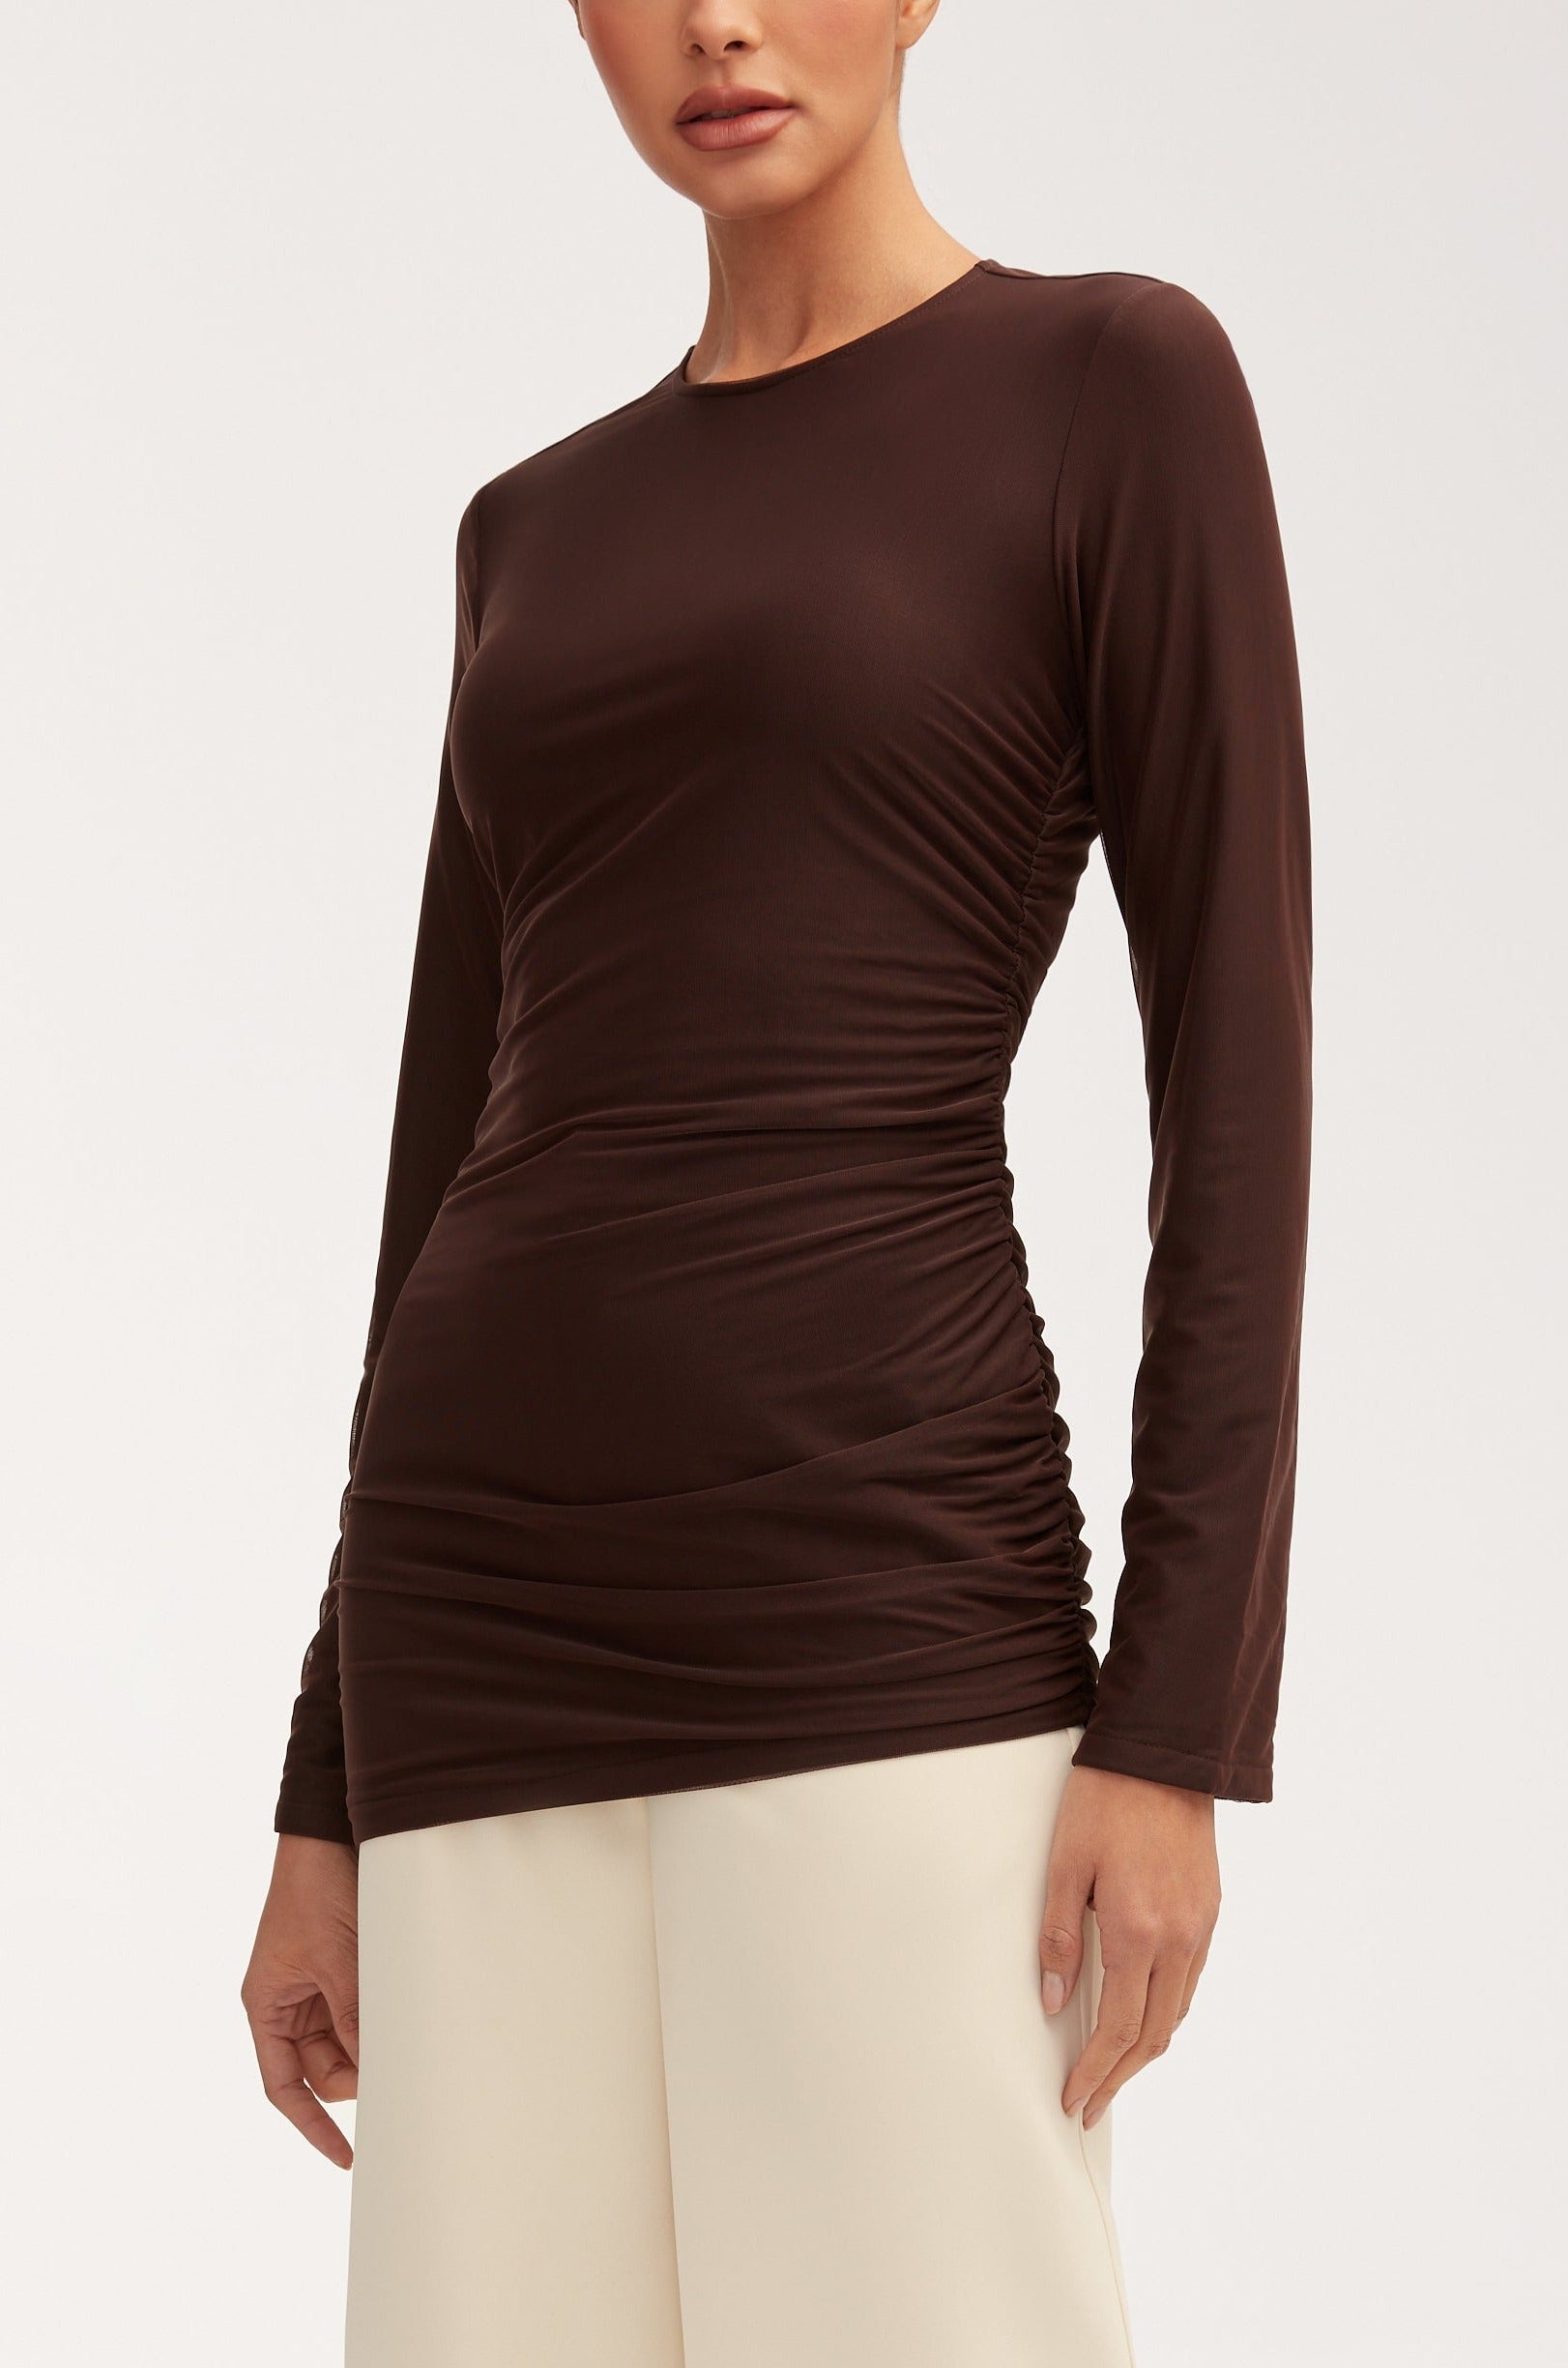 Long Sleeve Modest Tops, Shirts, & Blouses, Tunics – Page 2